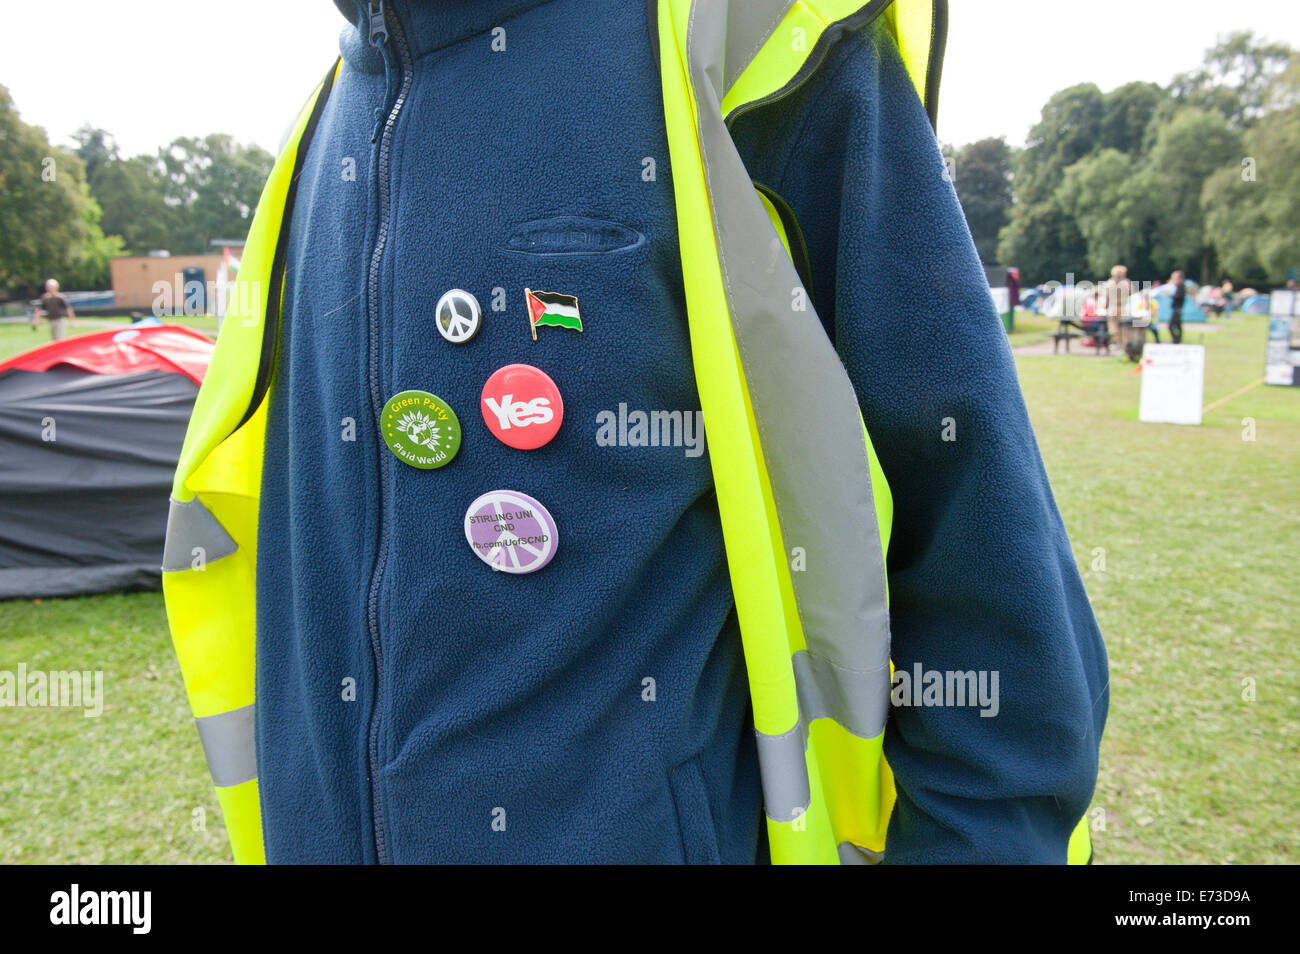 Newport, Gwent,  UK. 5th September 2014. Badges are worn by Alasdair Ibbotson 19 President of CND Group at Stirling University. Credit:  Graham M. Lawrence/Alamy Live News. Stock Photo